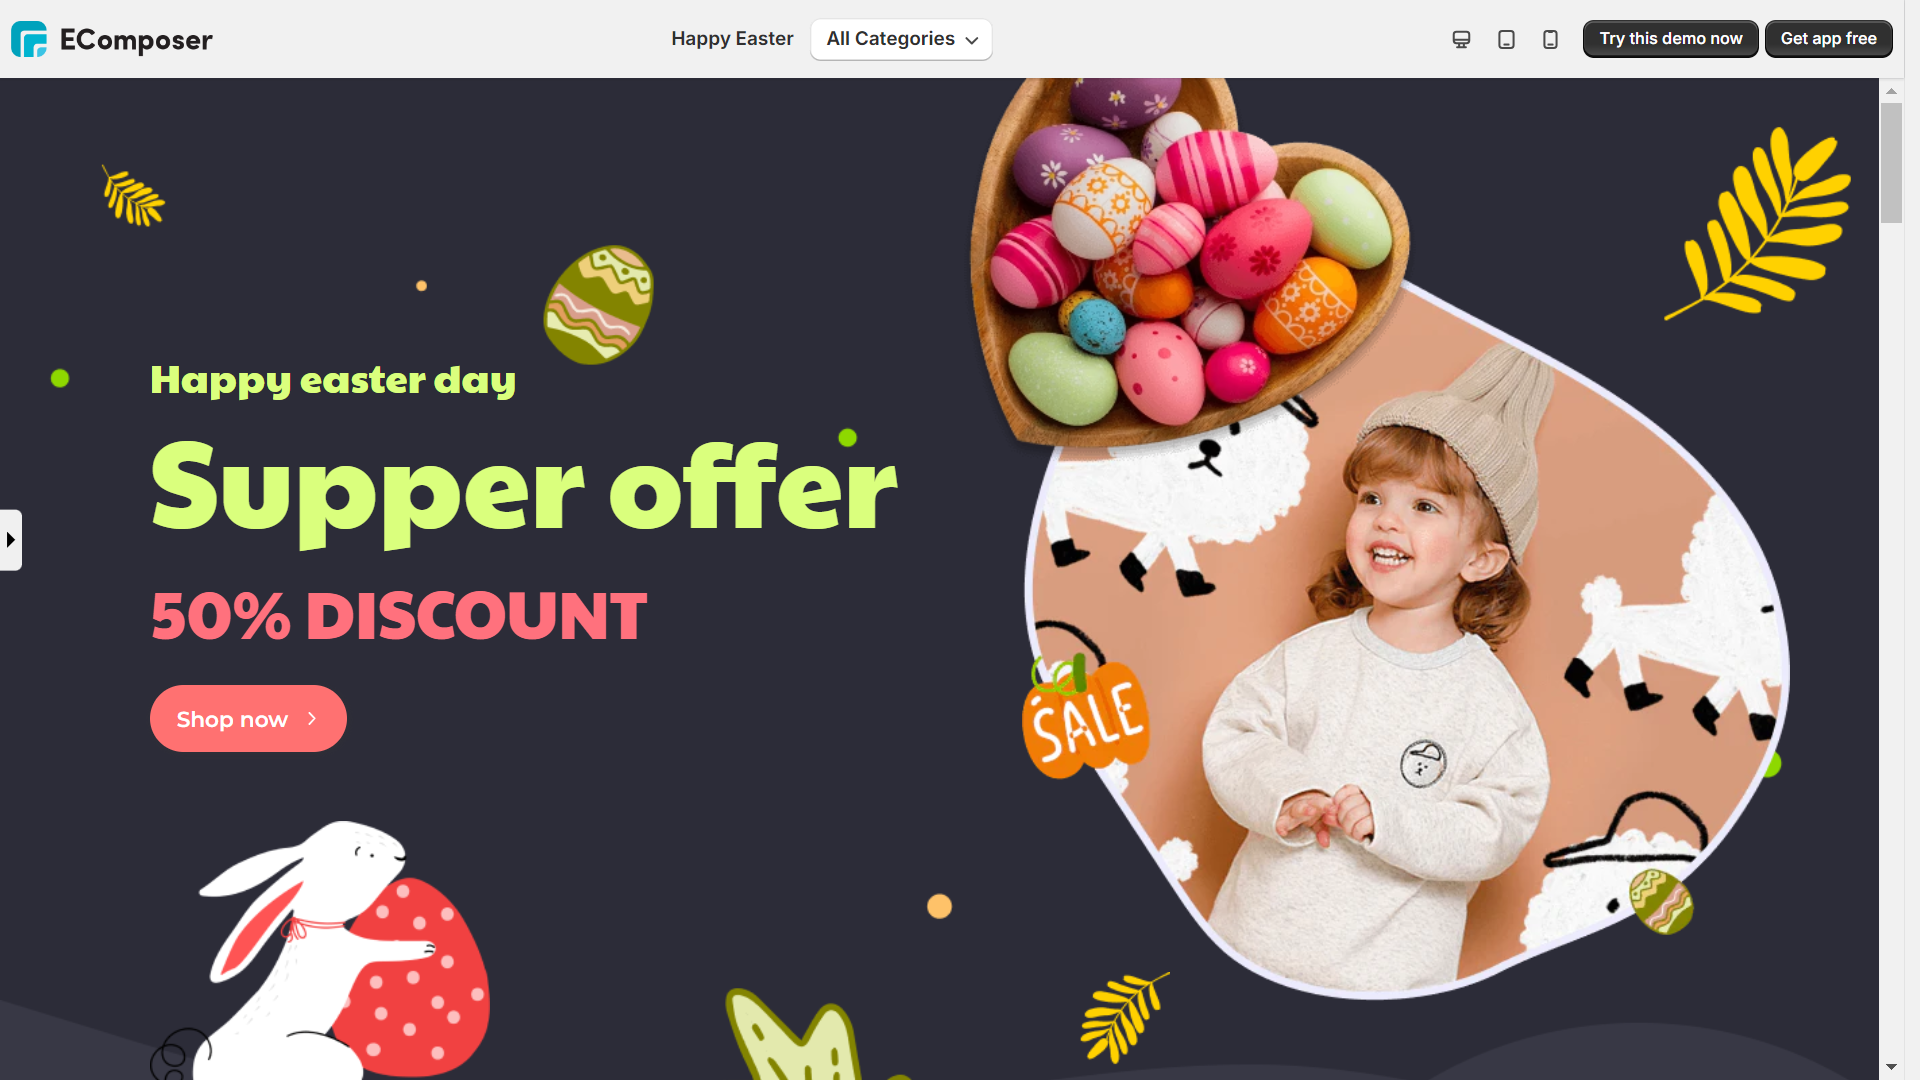 Easter-Themed Marketing Campaigns